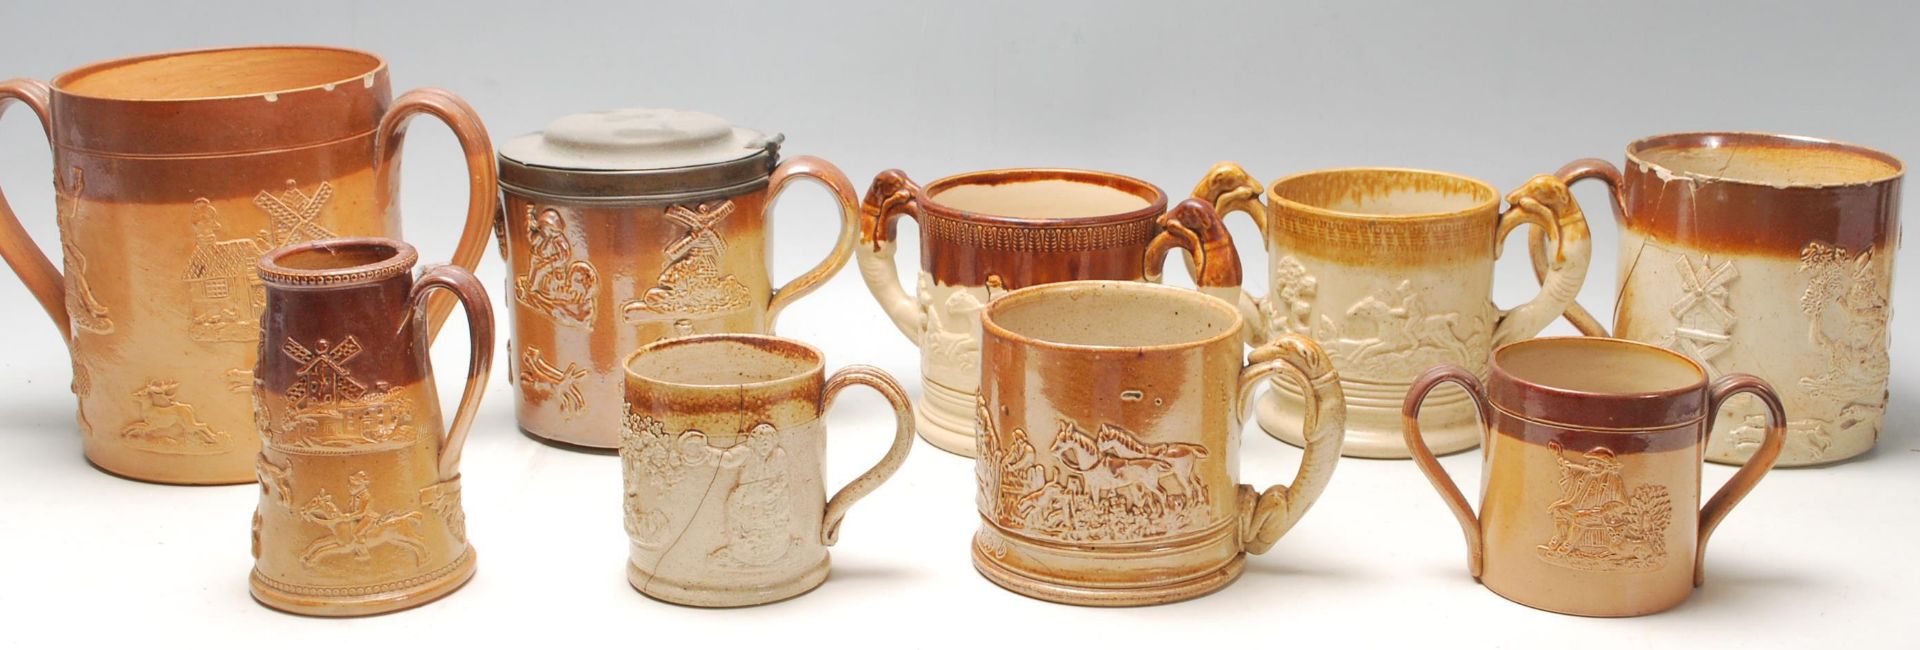 A large quantity of 19th century Royal Doulton Lambeth stoneware to include cups, jugs and loving